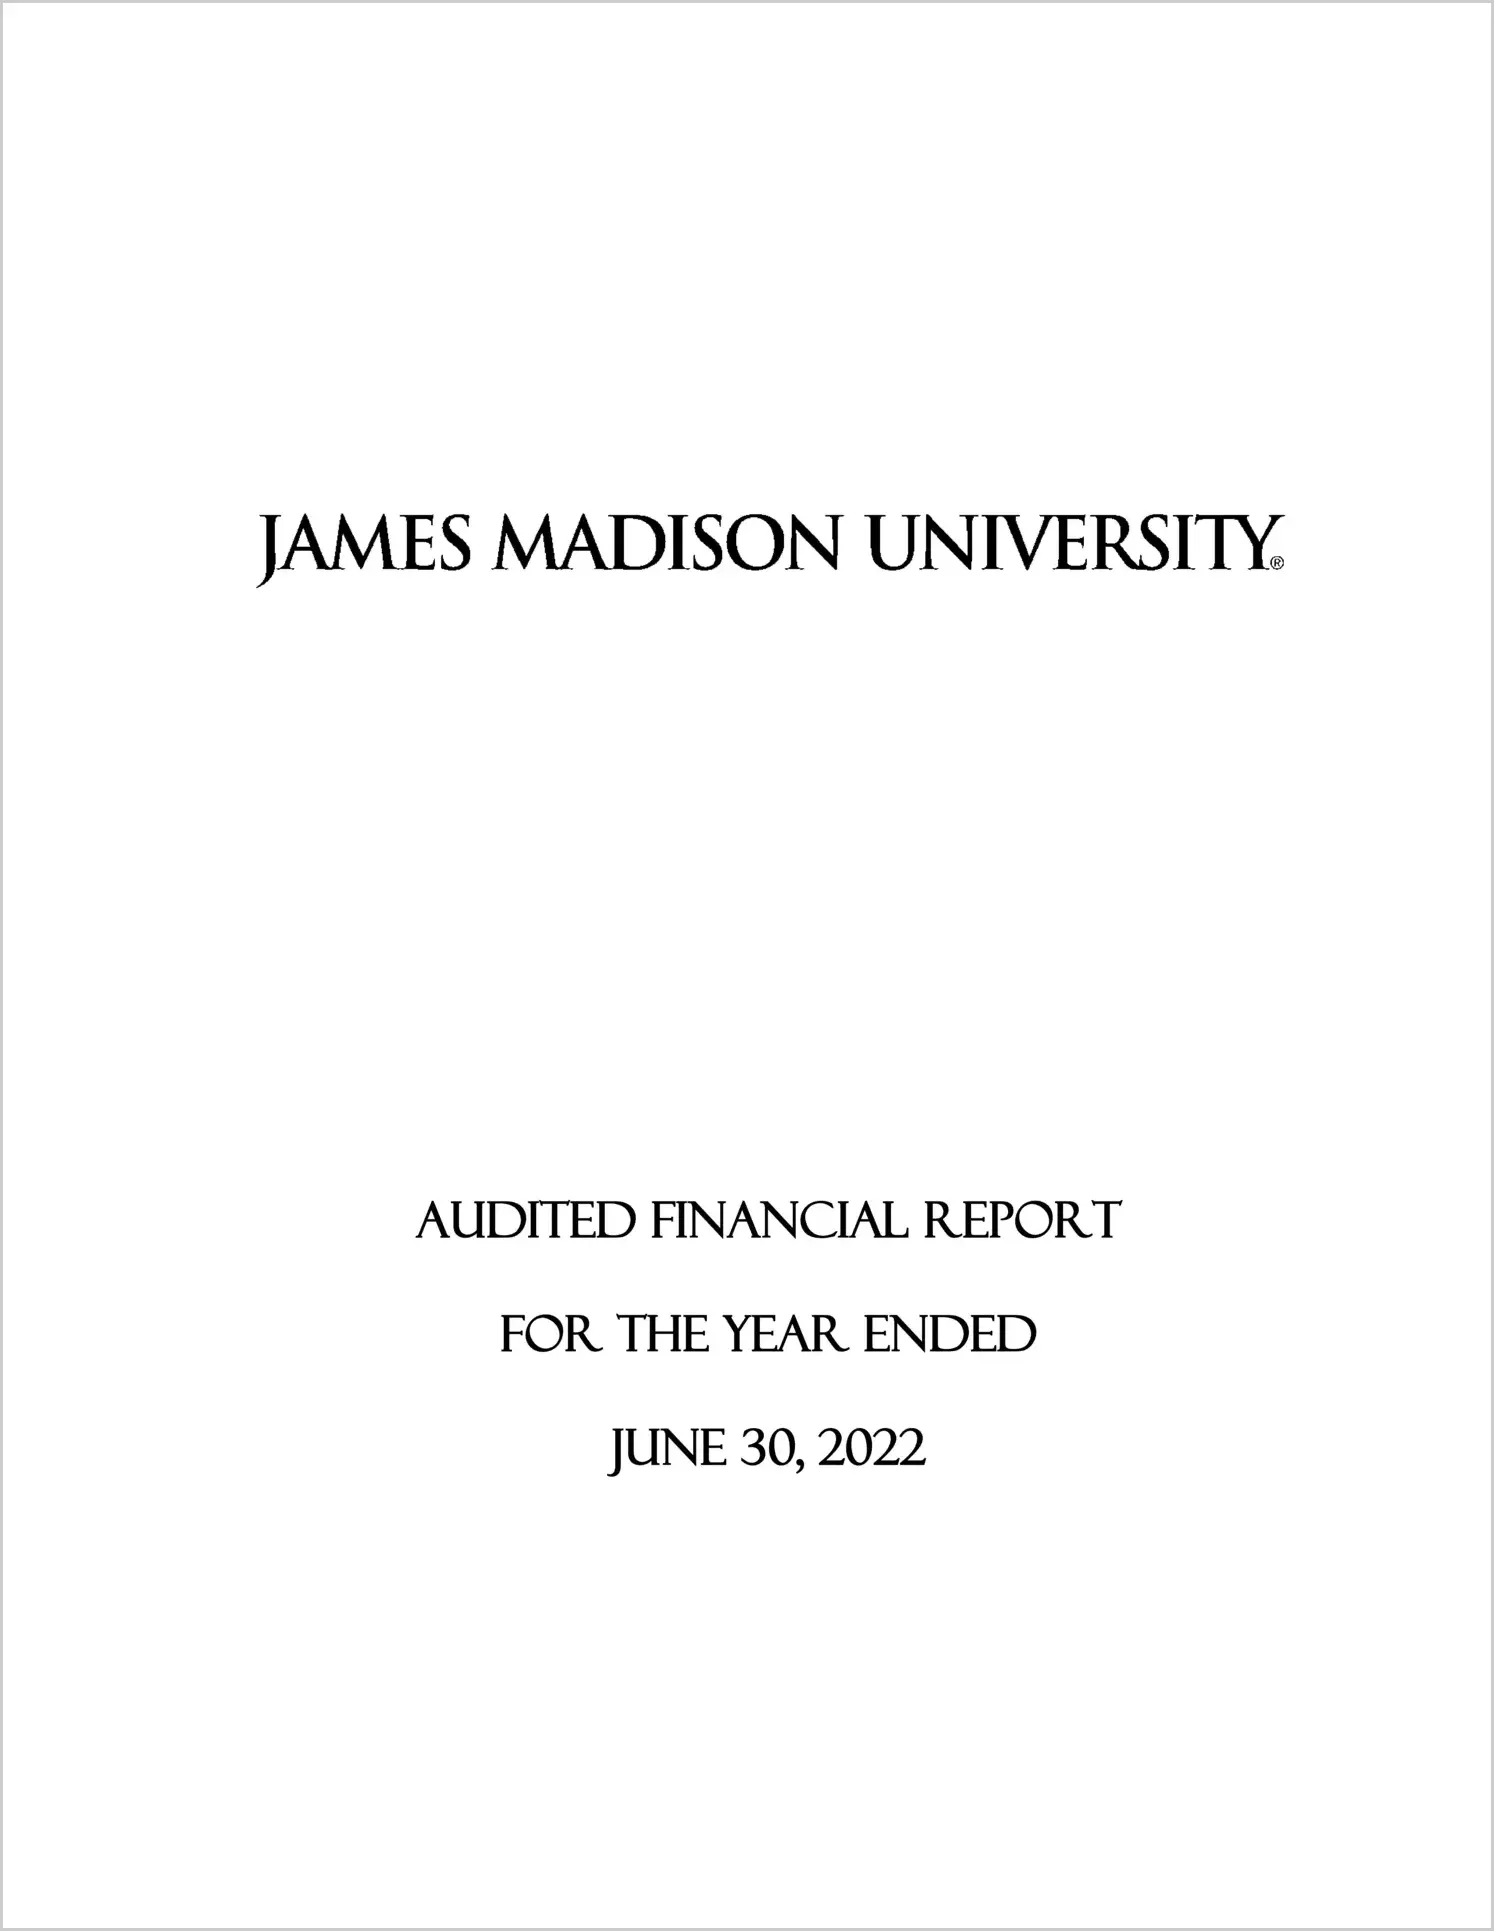 James Madison University Financial Statements for the year ended June 30, 2022